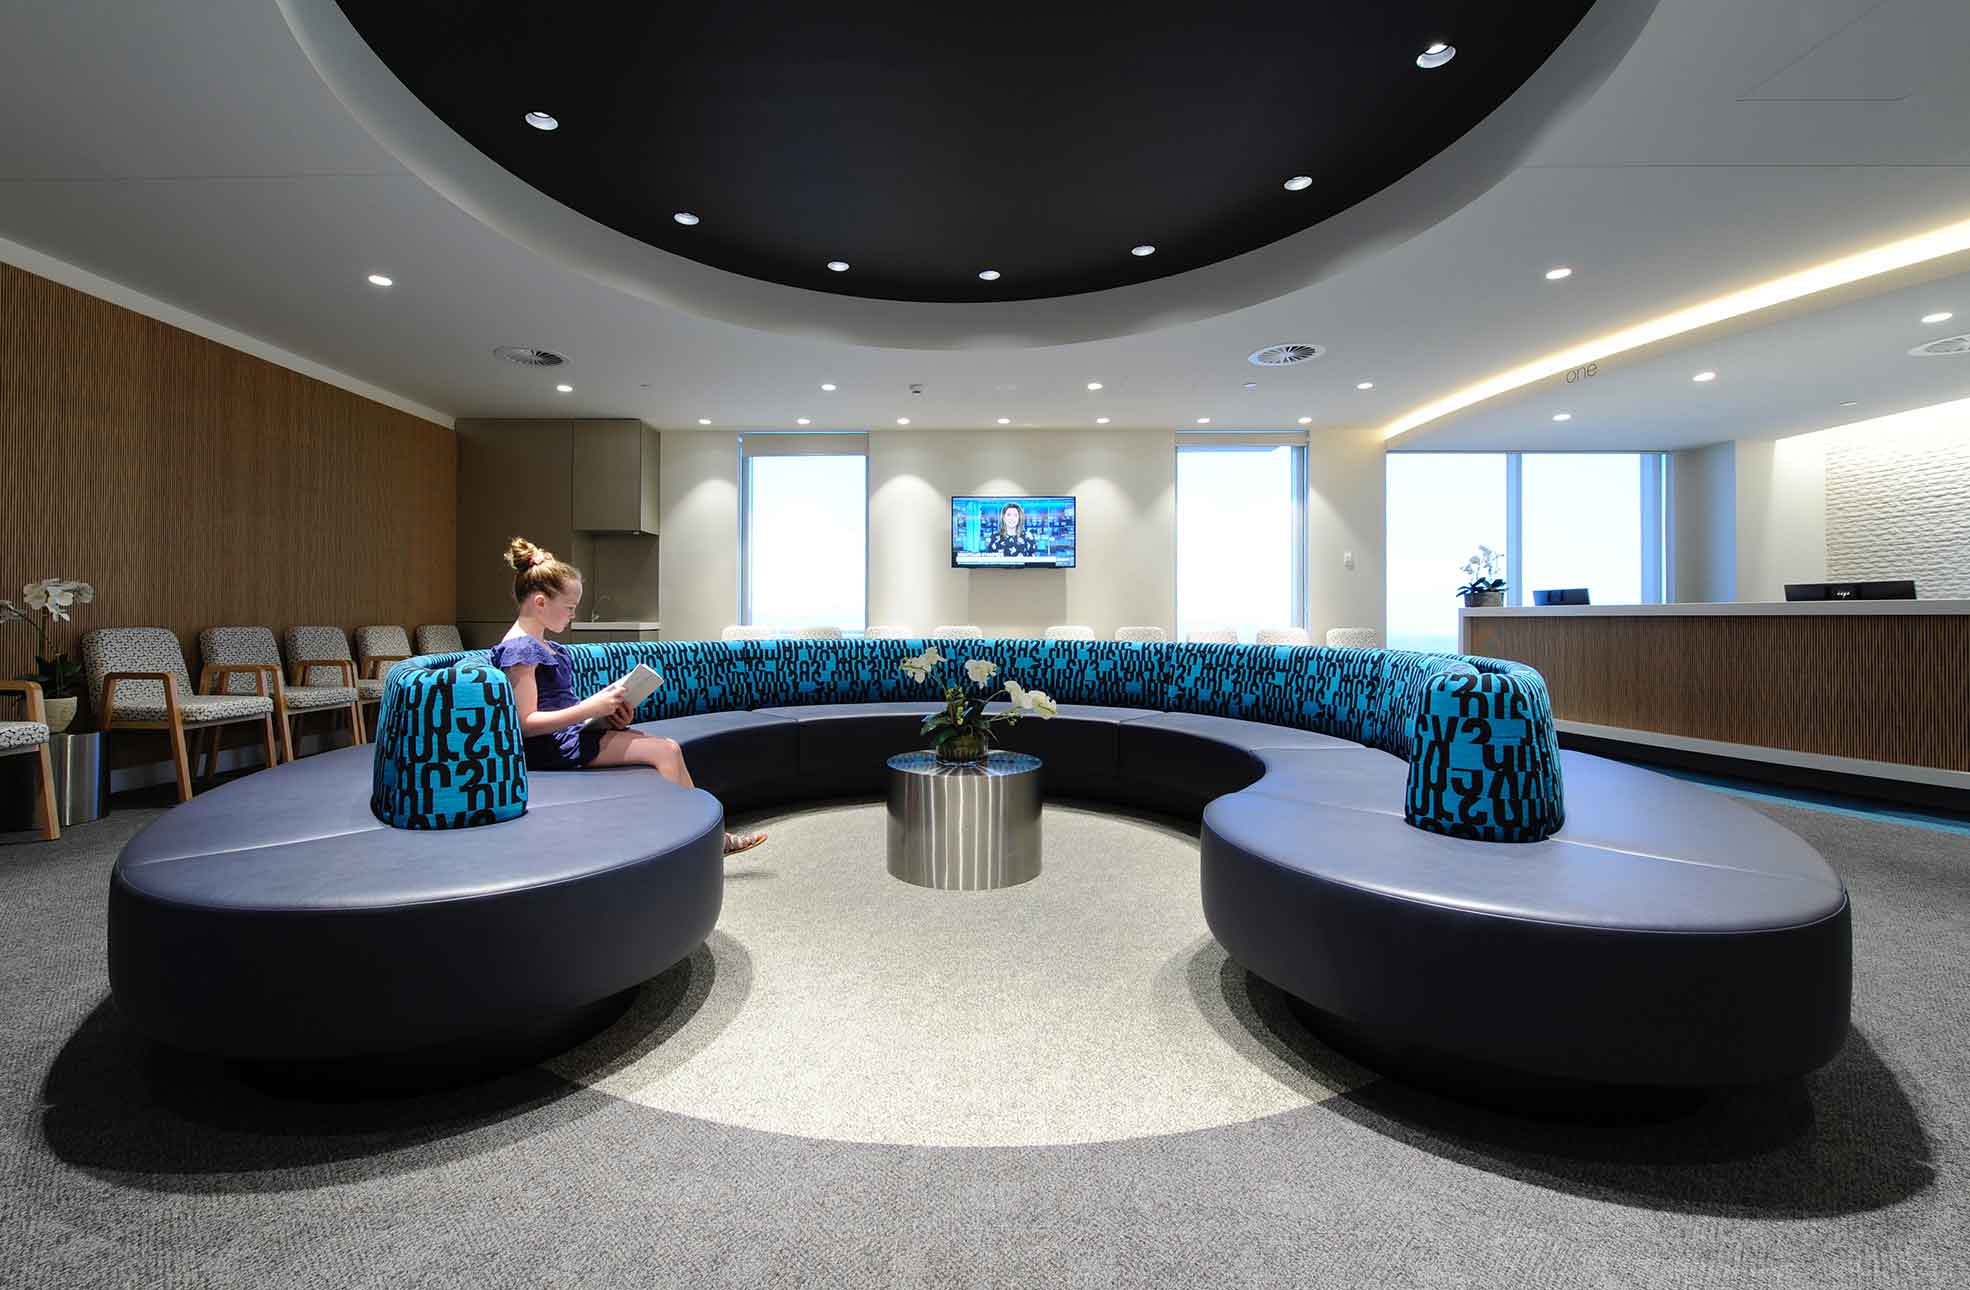 Healthcare fitout reception, modern curved blue patterned lounge